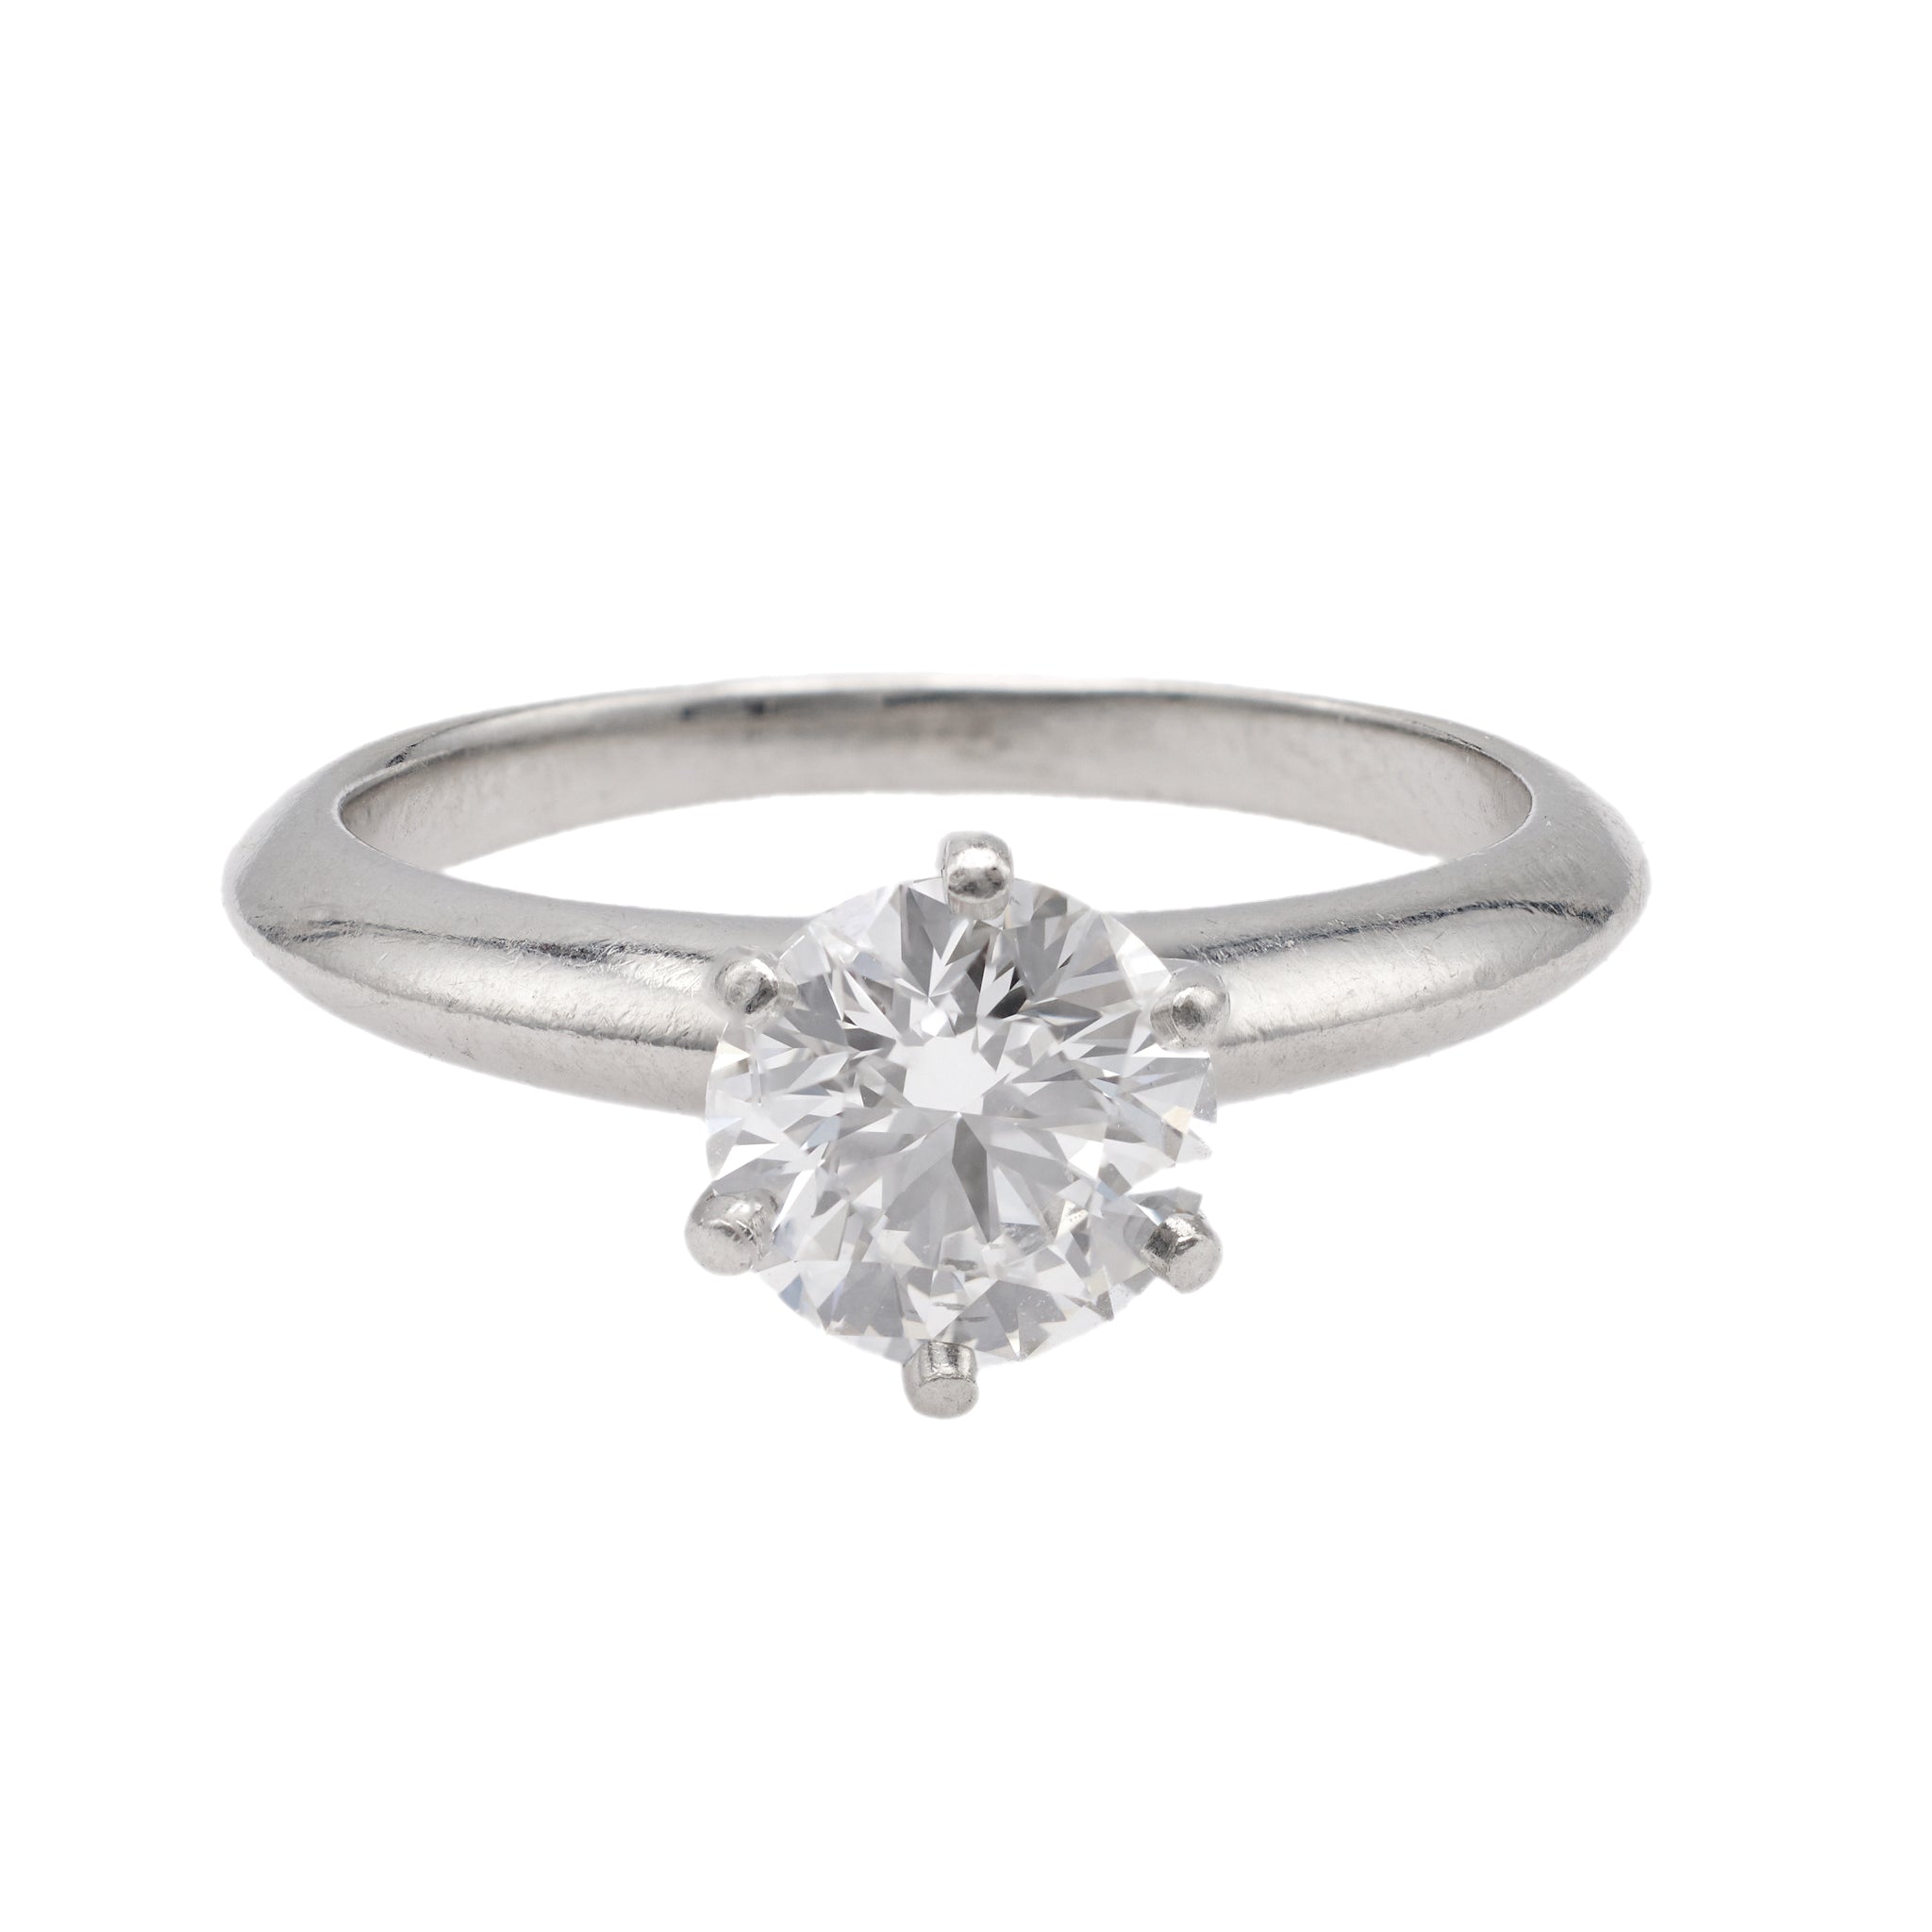 Vintage Tiffany & Co. 1.08 Carat Round Brilliant Cut Diamond Platinum Solitaire Ring Rings Jack Weir & Sons   